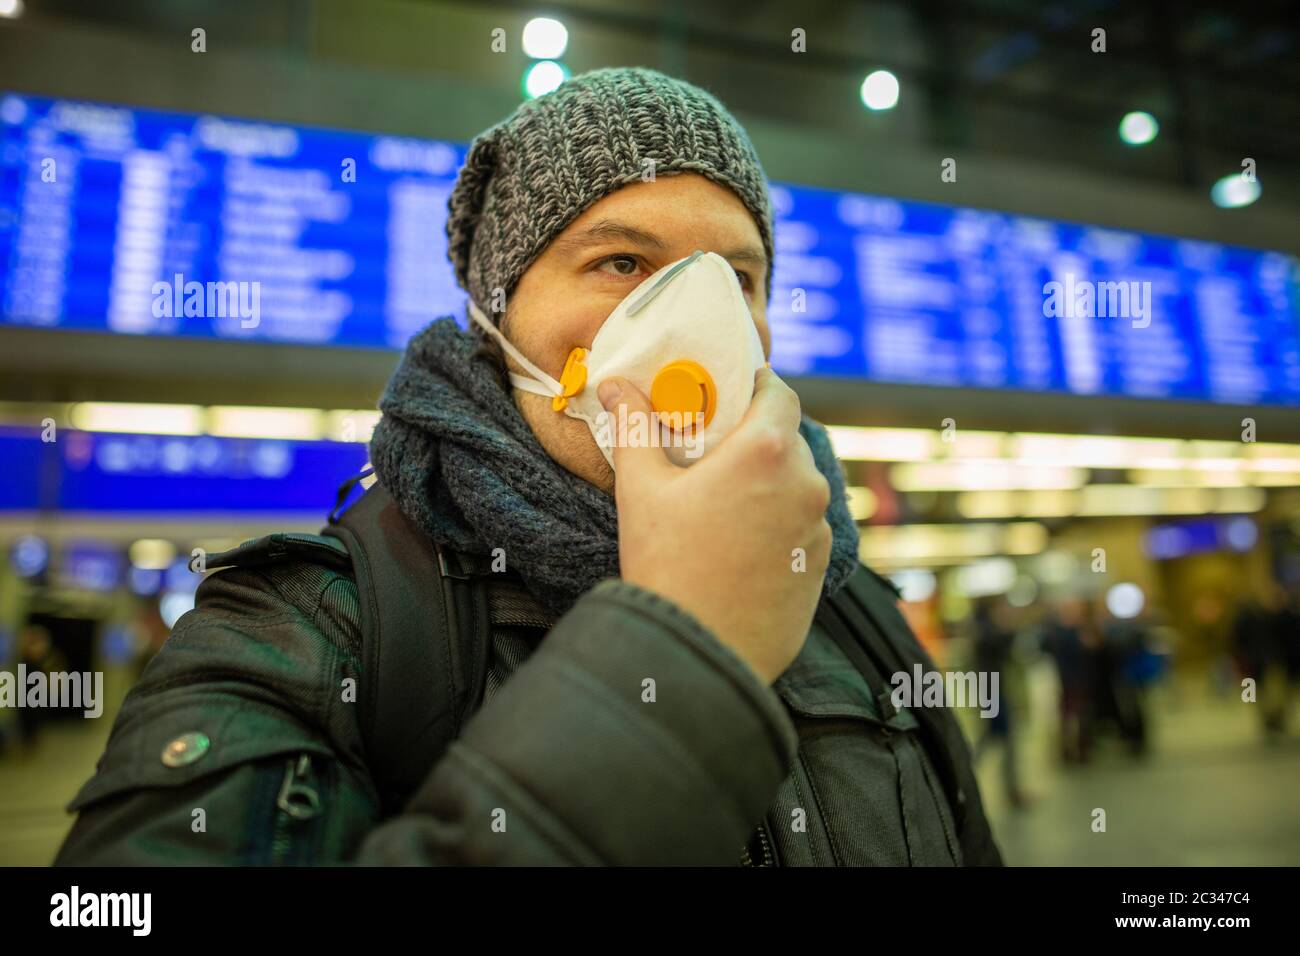 Man wearing a respirator mask device for health protection at an airport or railway train station in Stock Photo